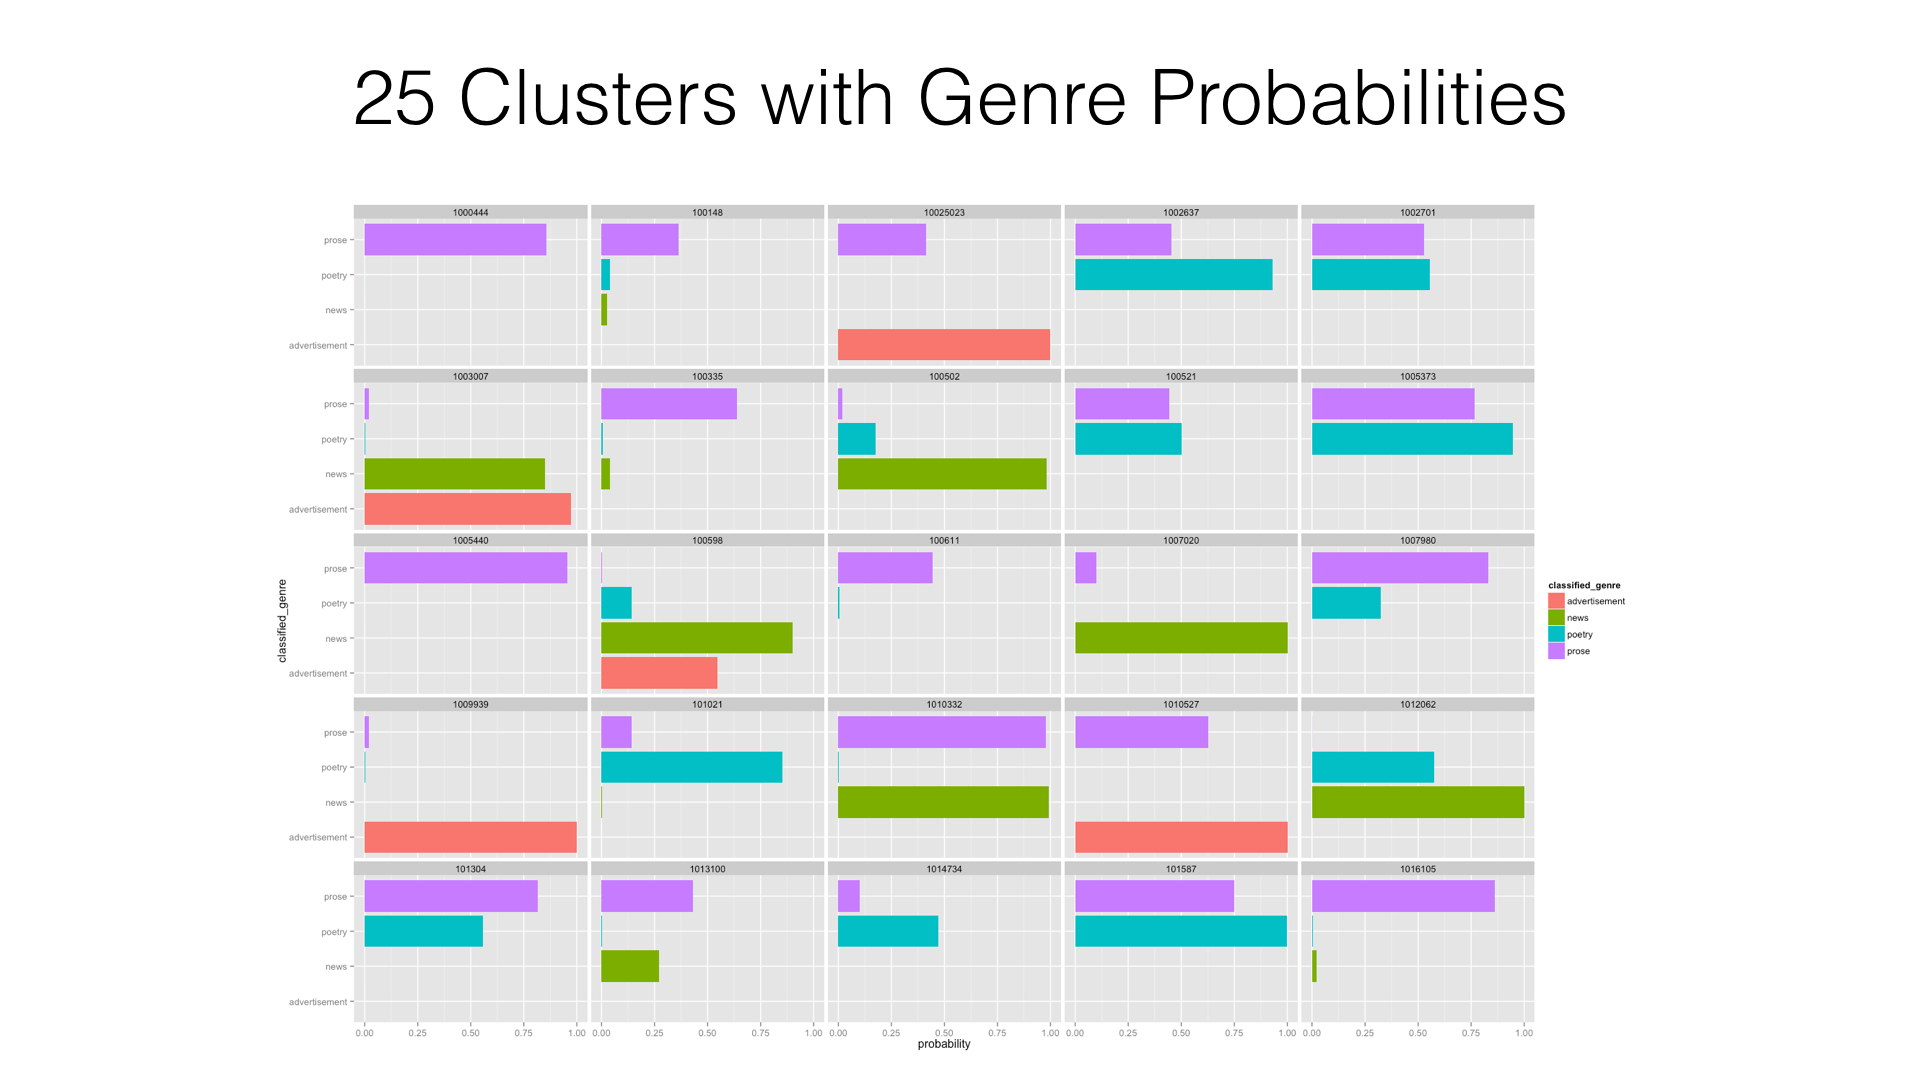 The probabilities of clusters belonging to four genres